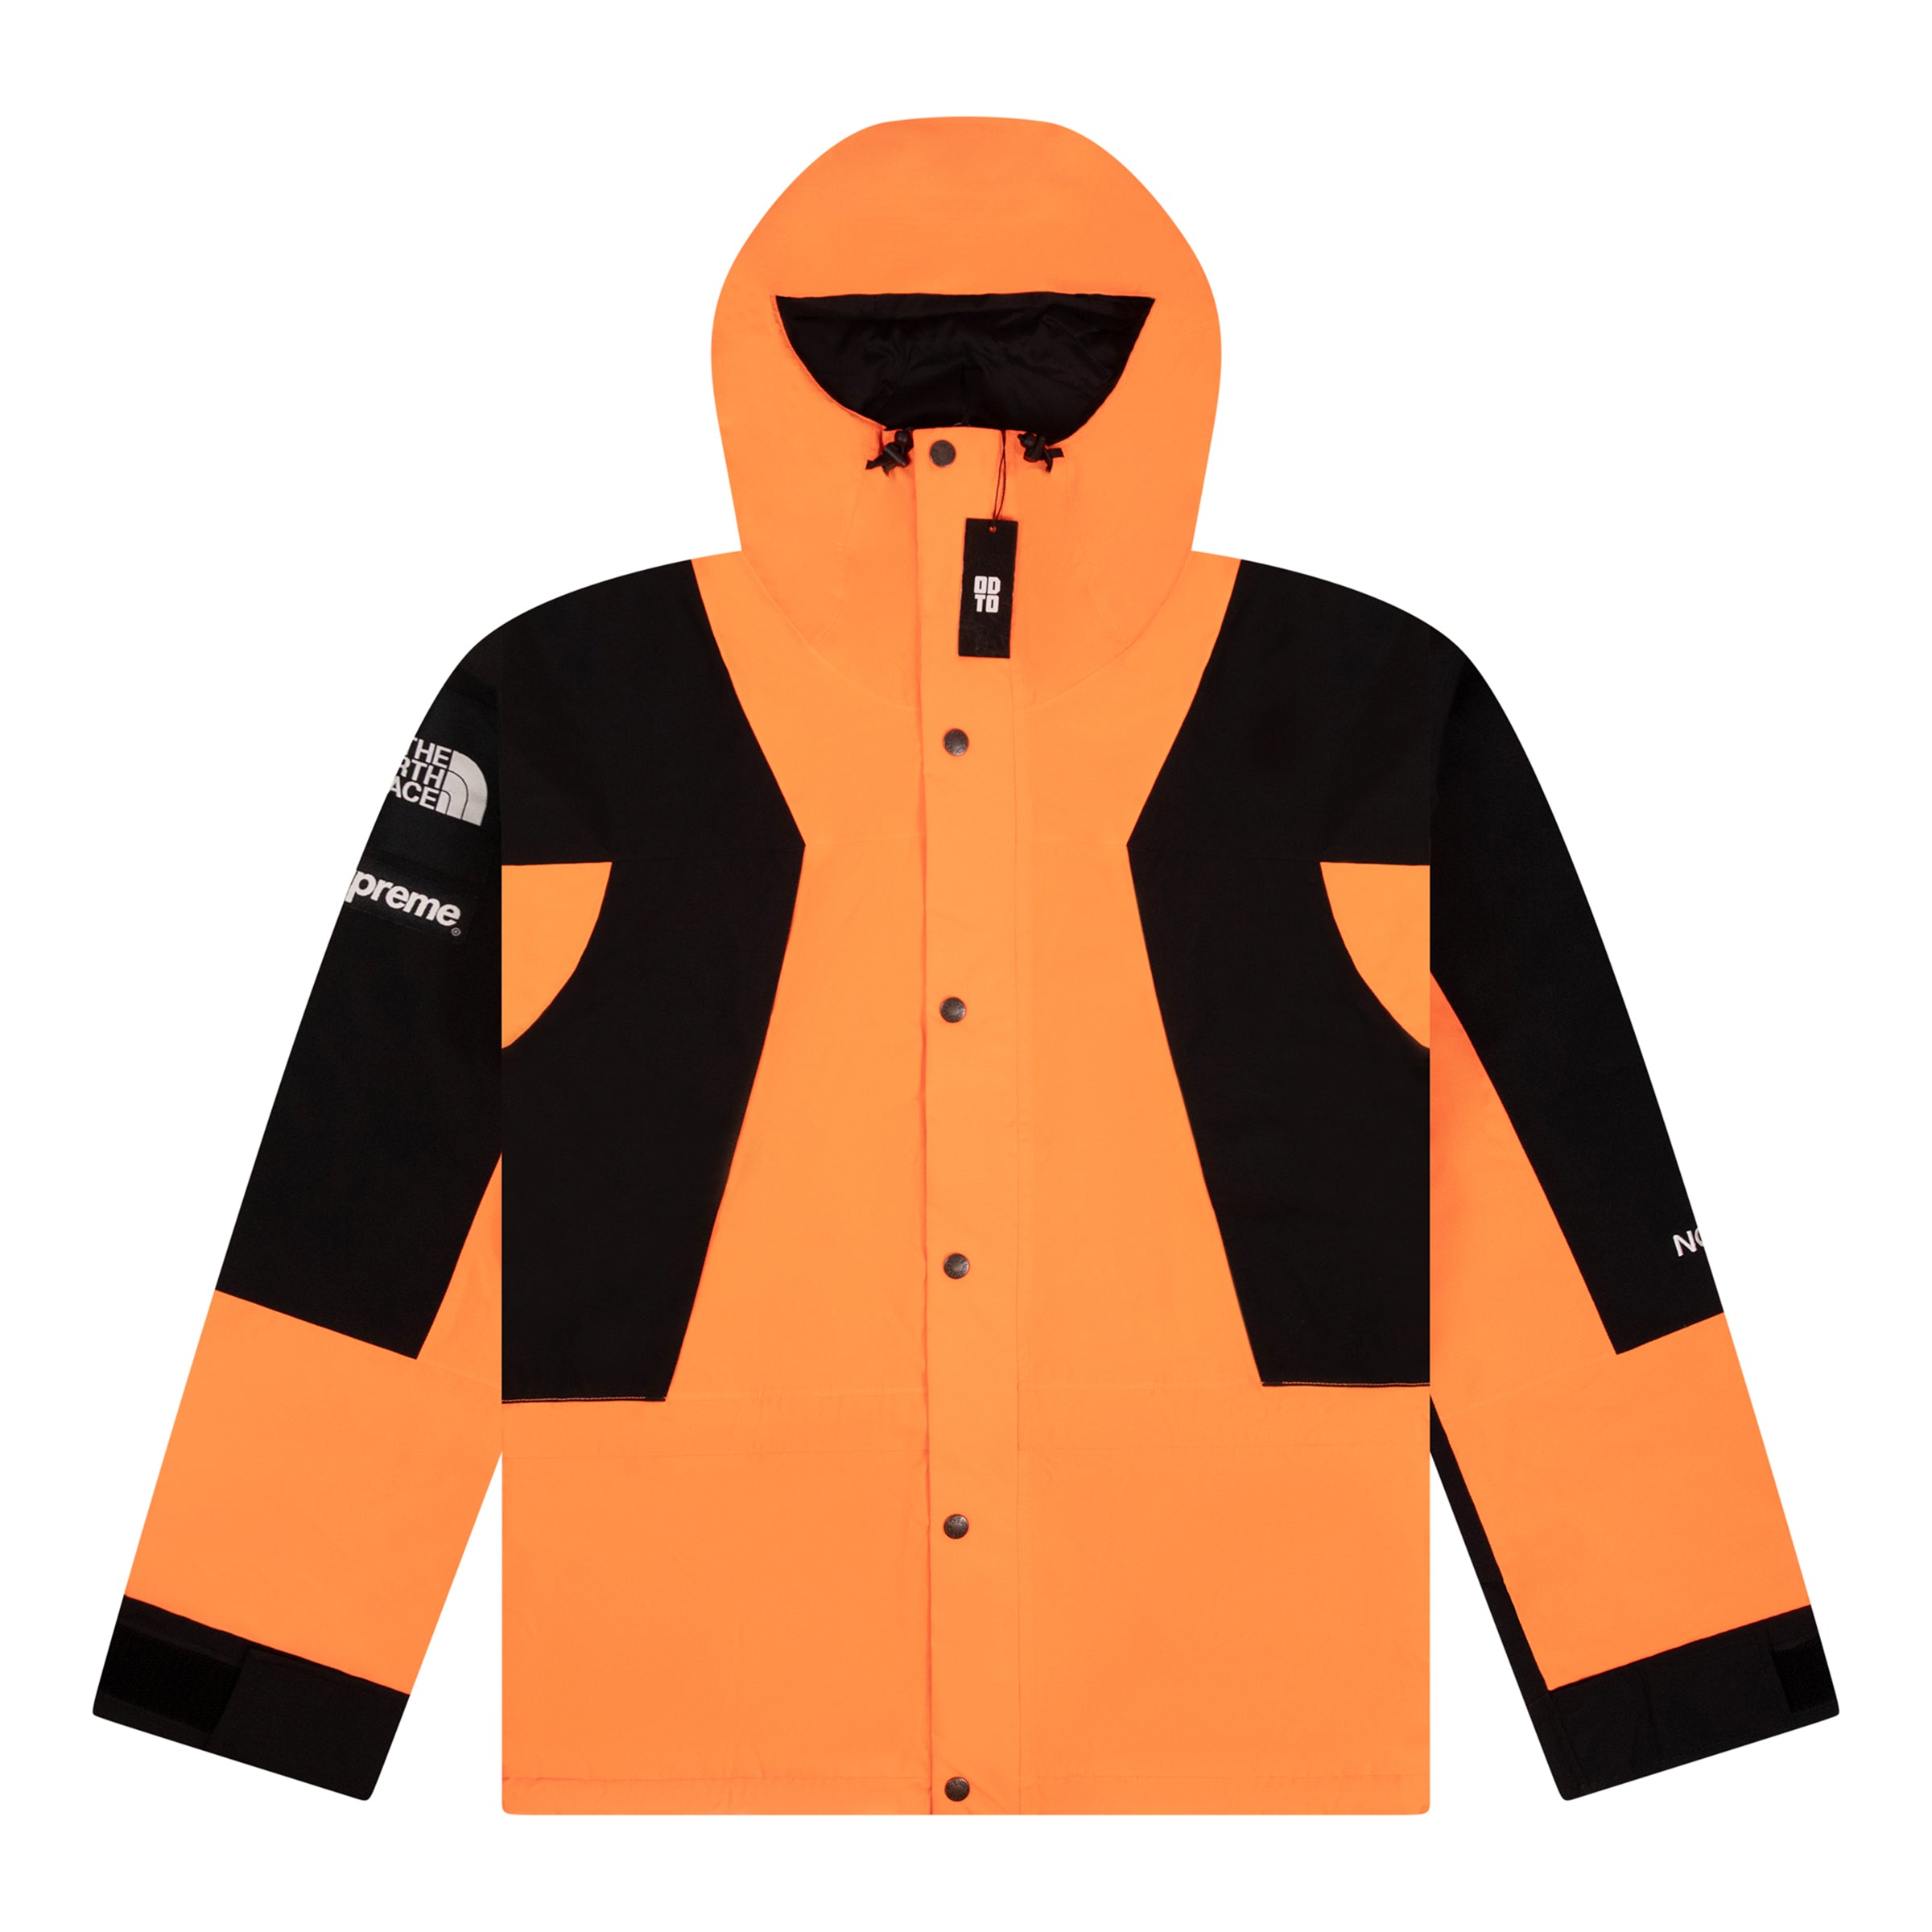 SUPREME THE NORTH FACE MOUNTAIN 轻薄夹克 橙色